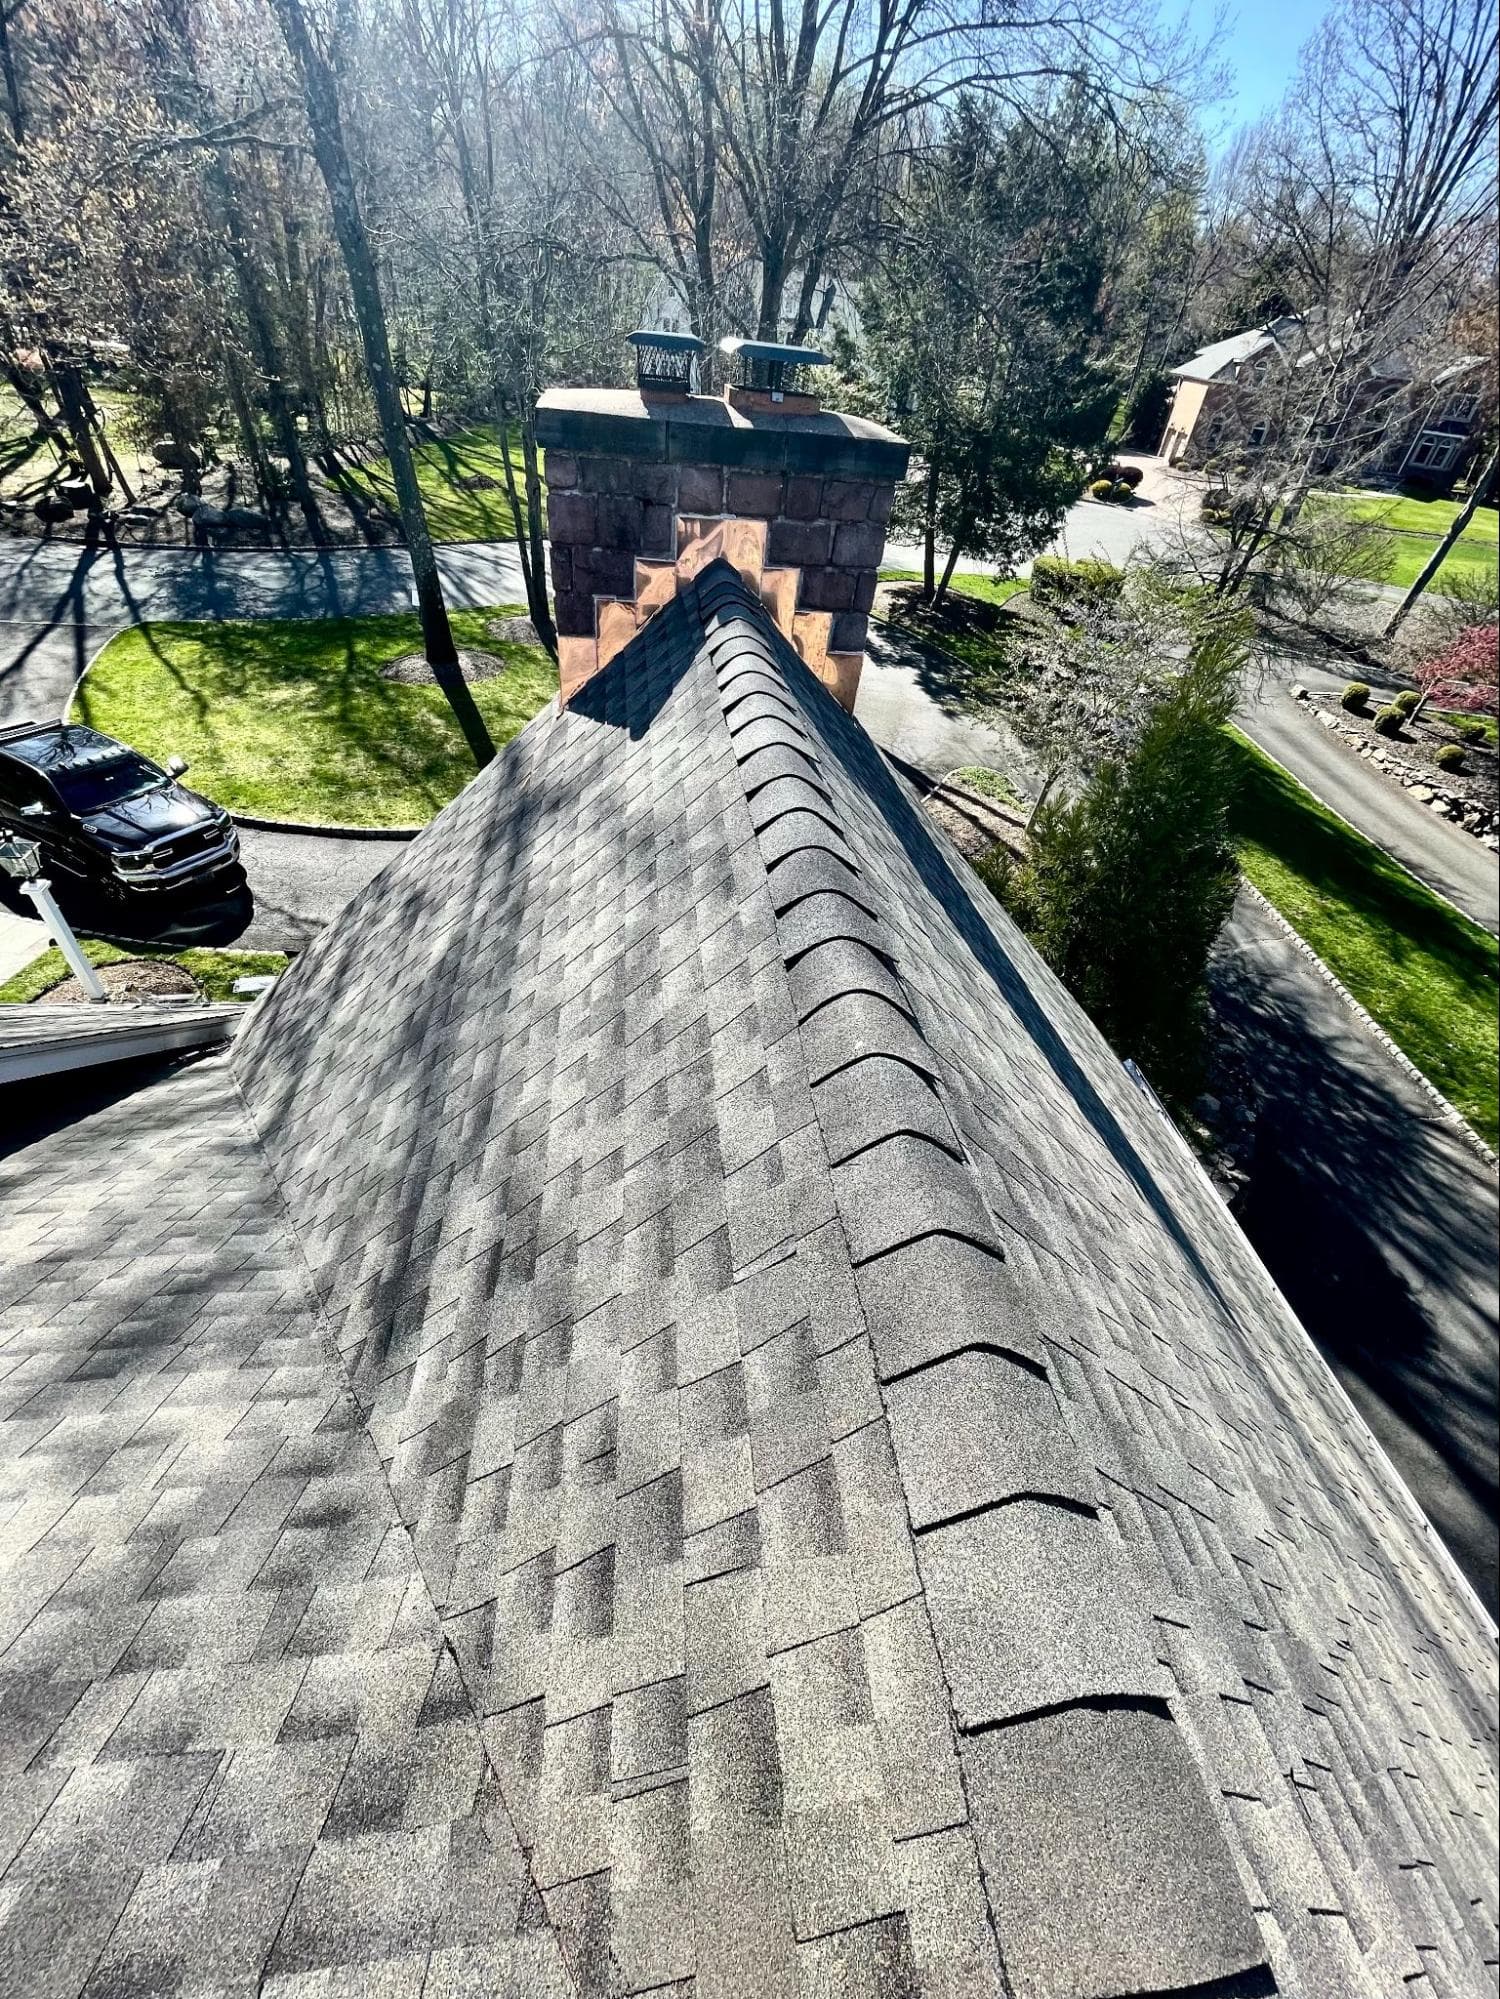 Roof Replacement Upper Saddle River NJ